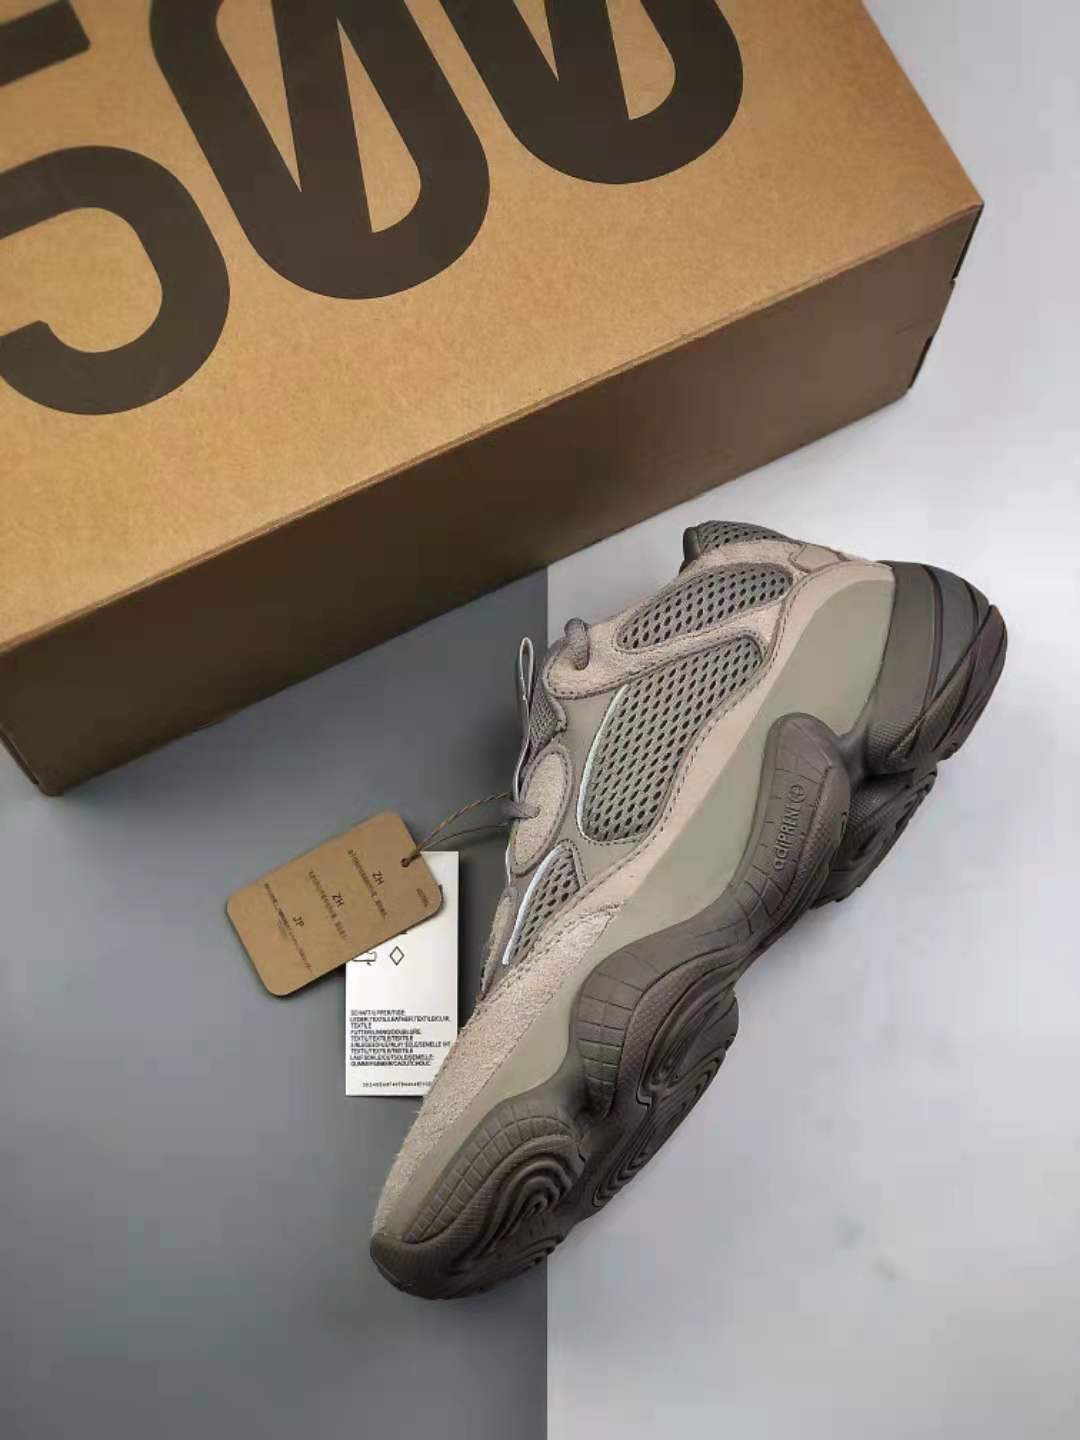 Adidas Yeezy 500 'Ash Grey' GX3607 - Latest Release and Classic Design